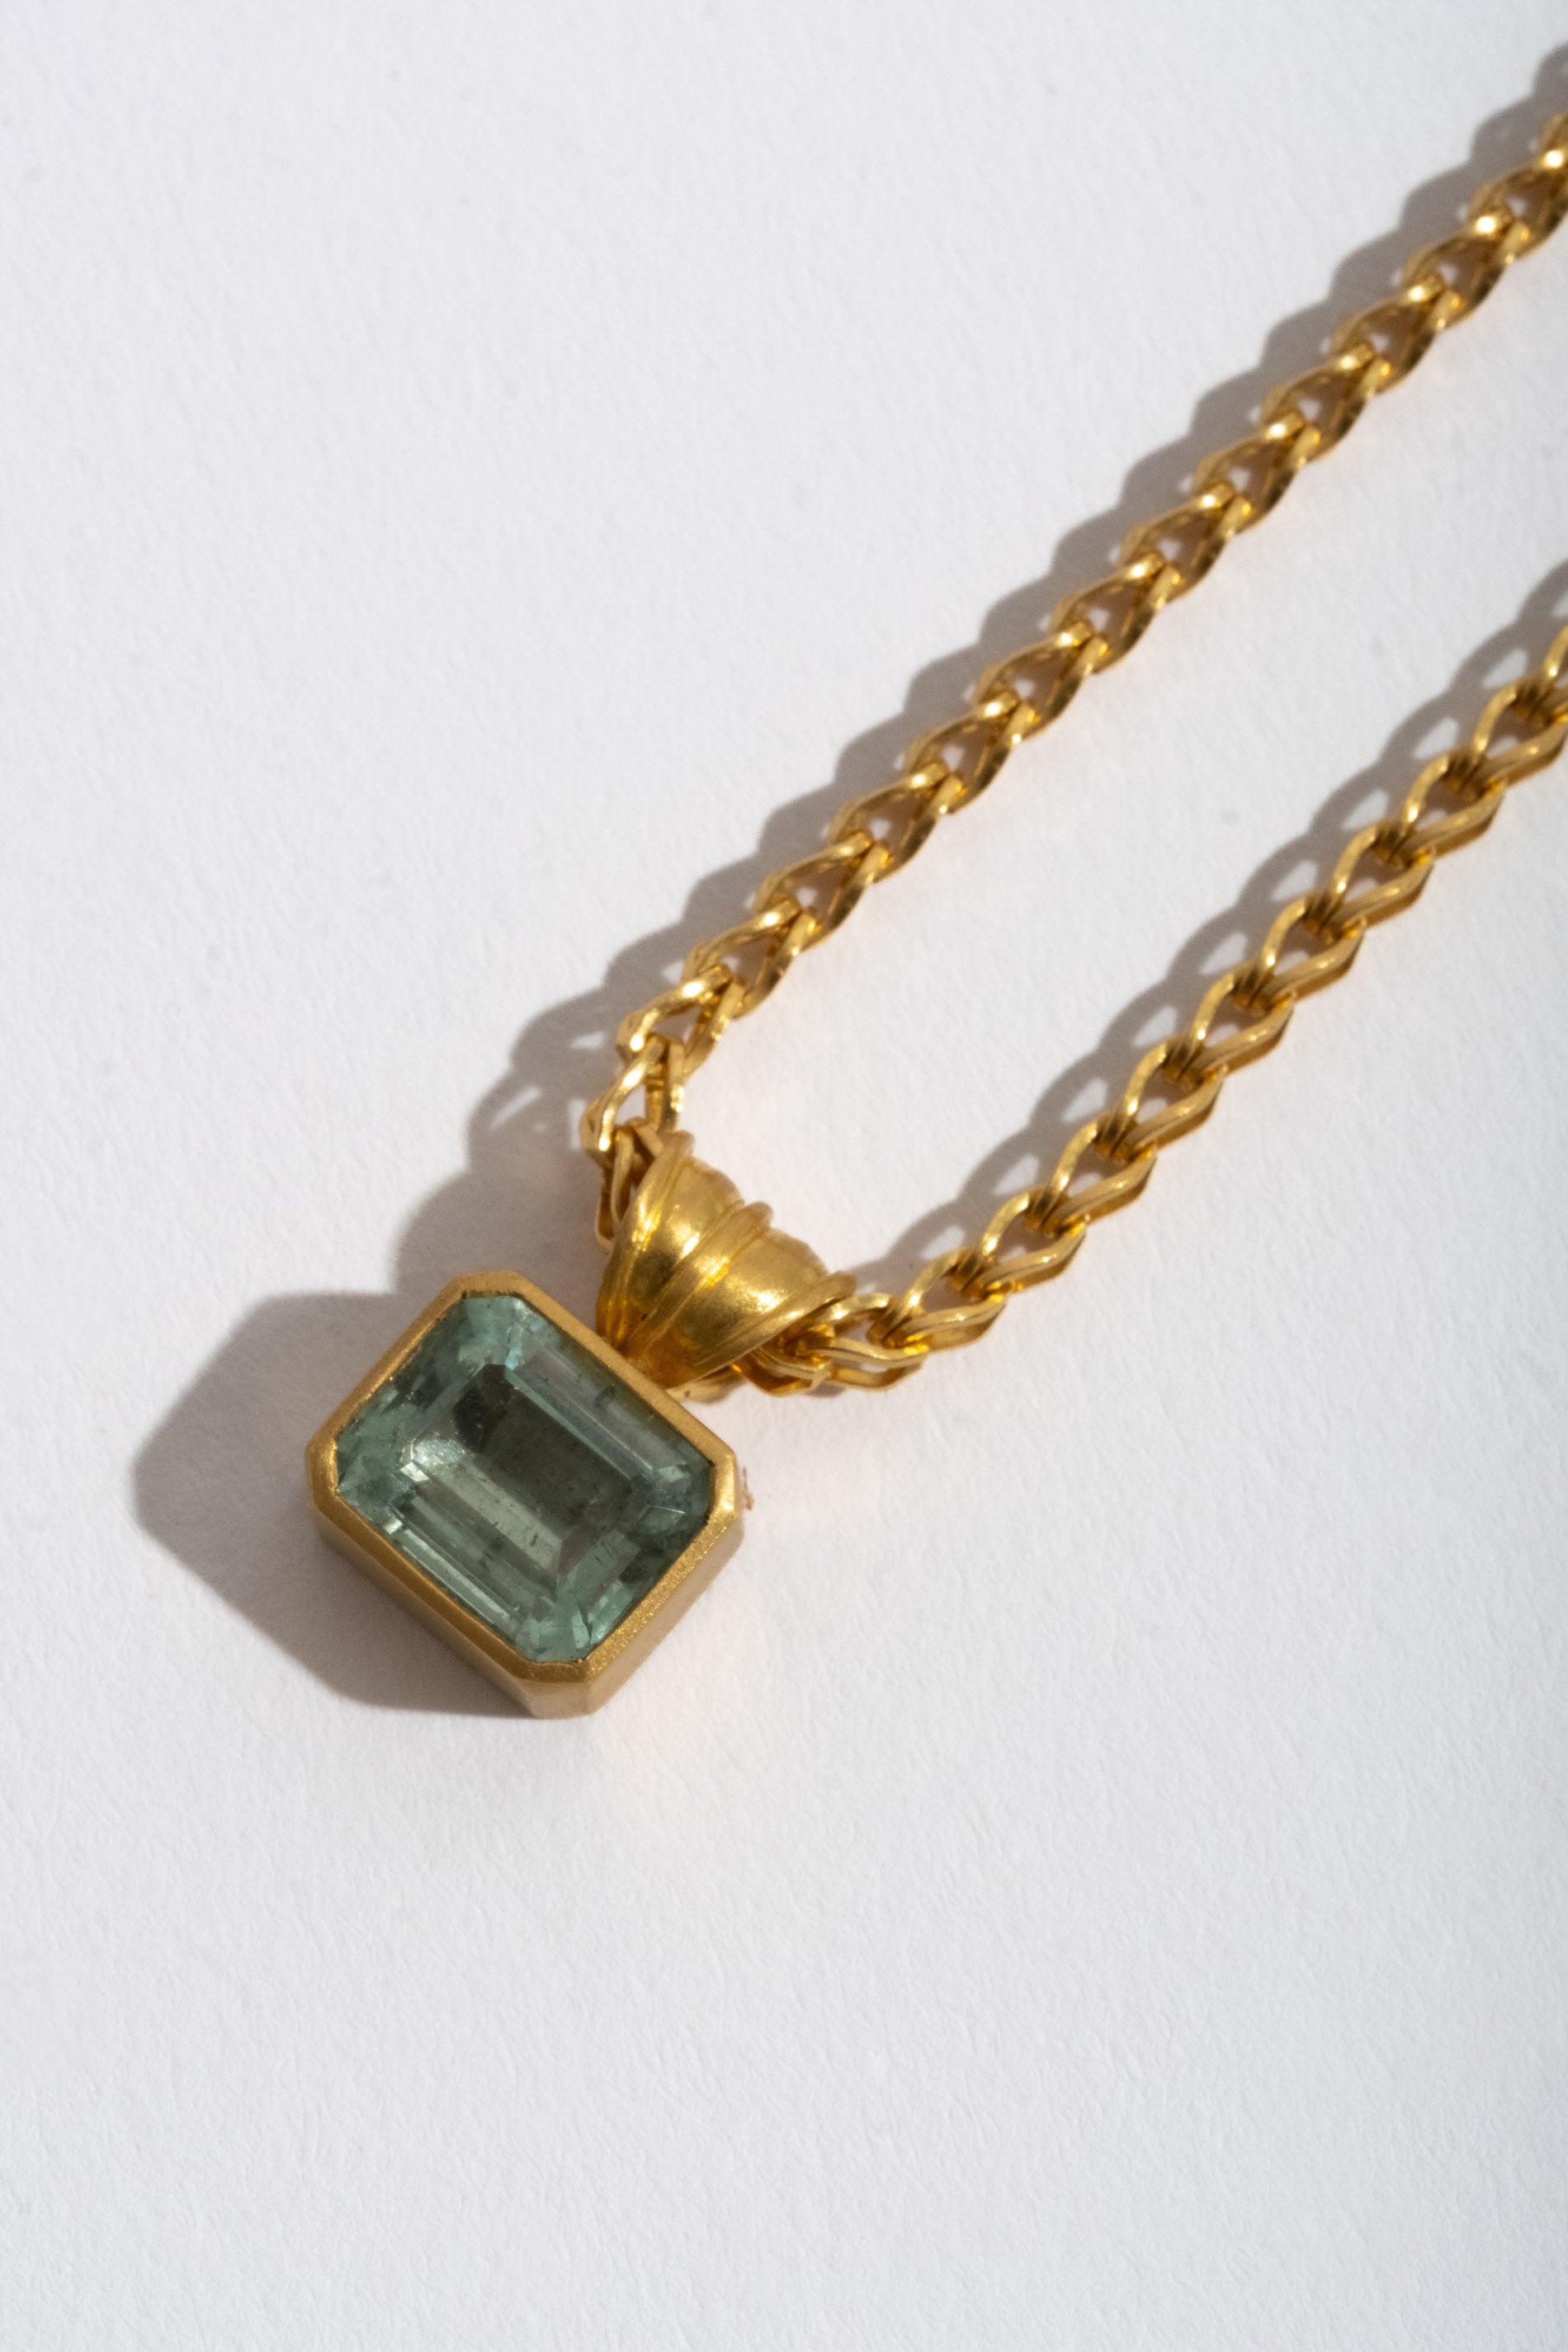 Long Faceted Stone Chain Necklace – Color Block Necklace – Citrine –  Peridot – Lemon Quartz – Green Onyx – 14k Yellow Gold Filled Chain